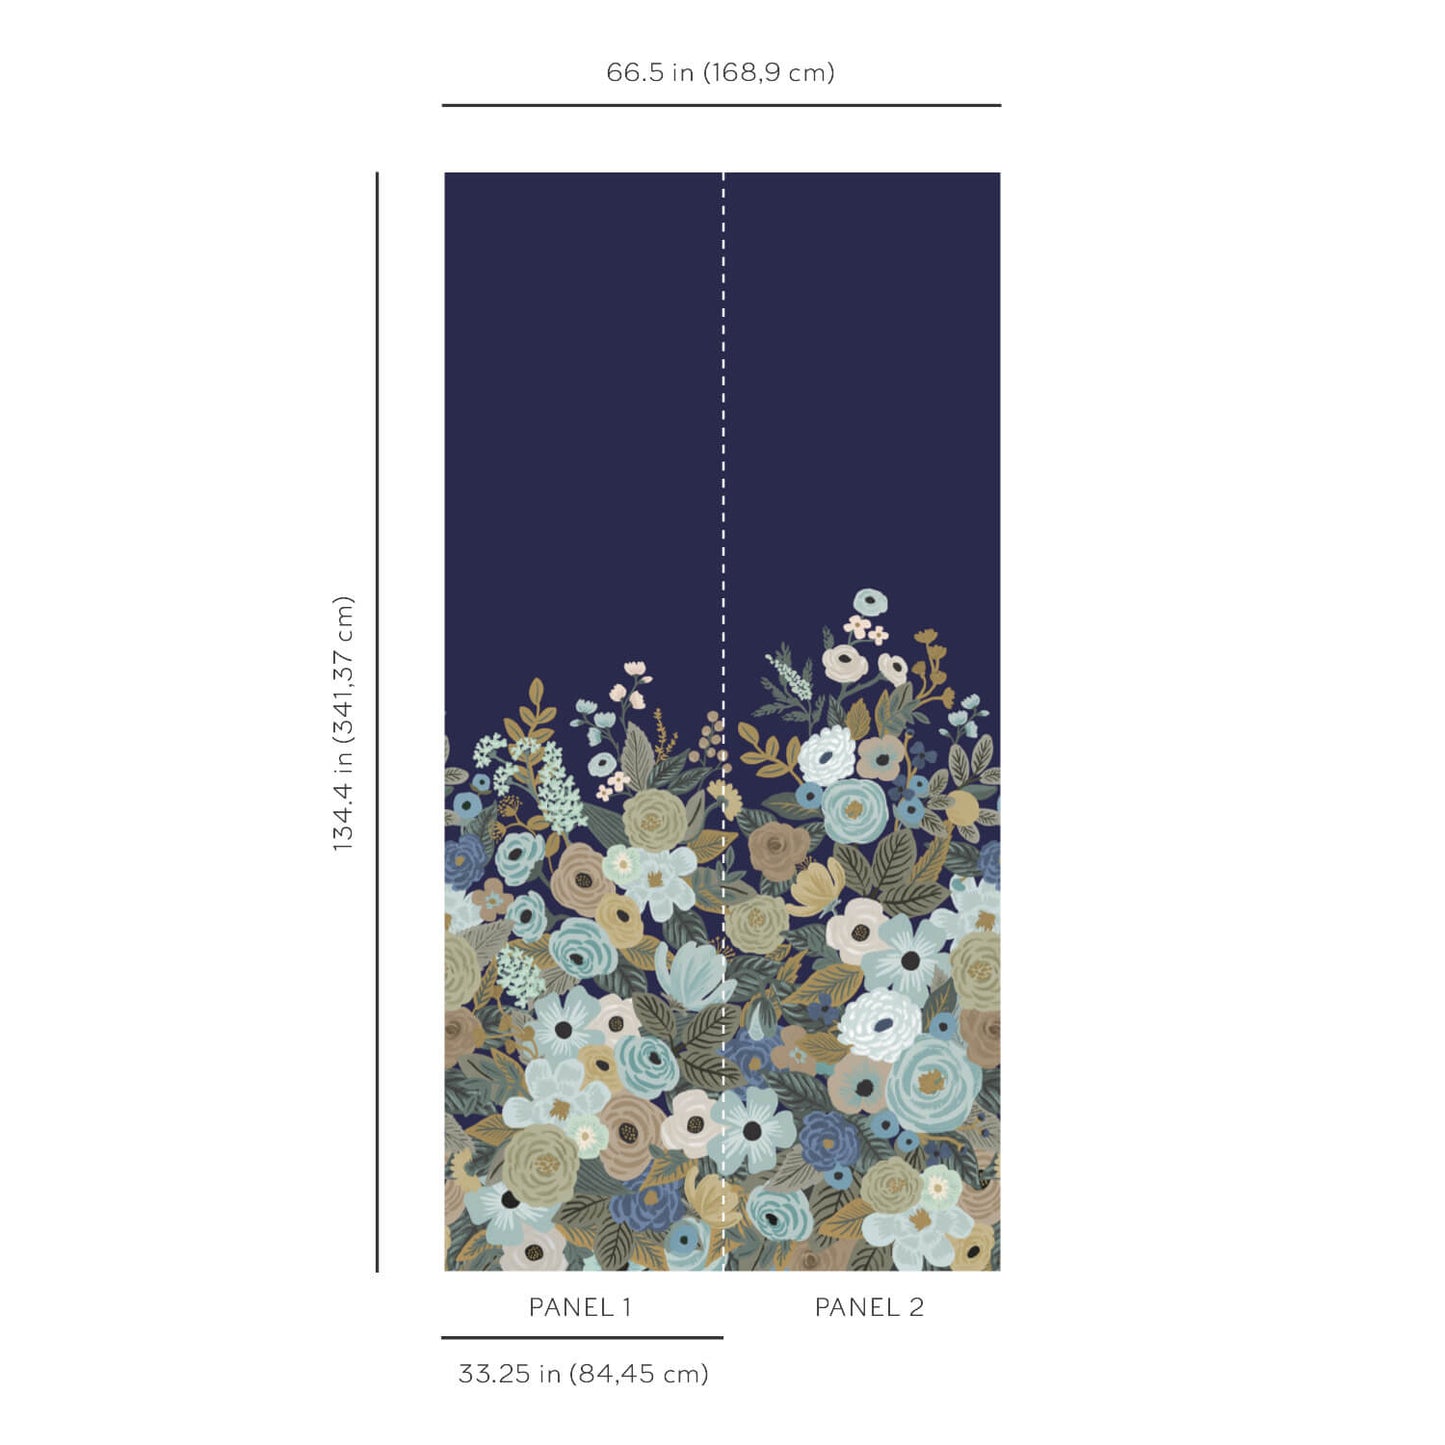 Rifle Paper Co. 3rd Edition Garden Party Wall Mural - Navy